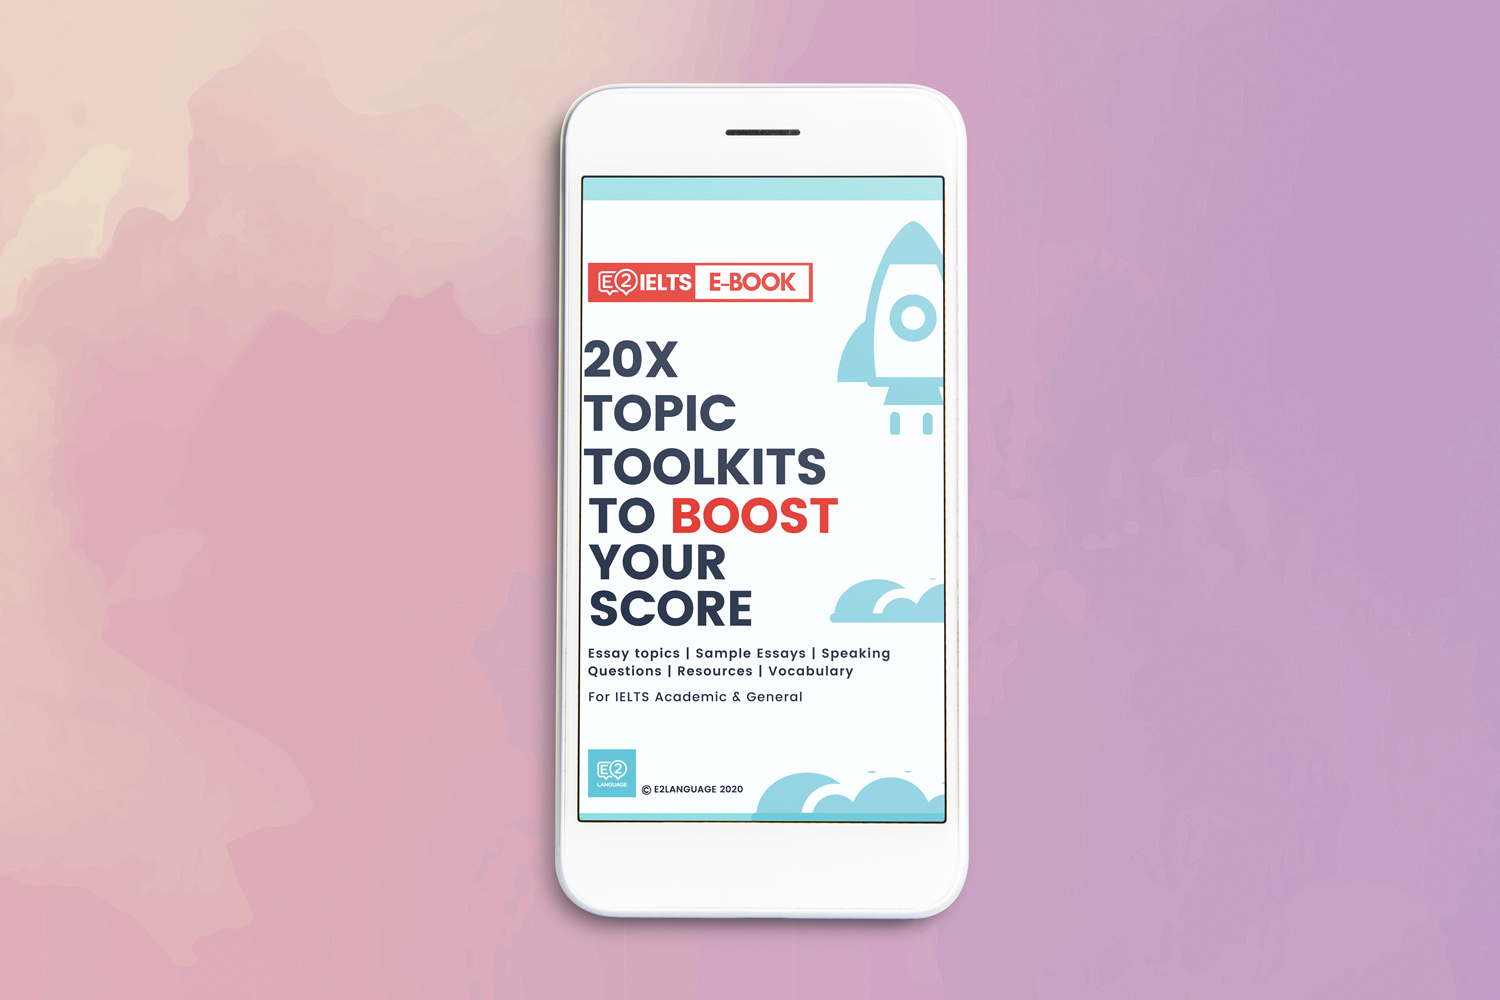 20X Topic Toolkits to Boost Your Score